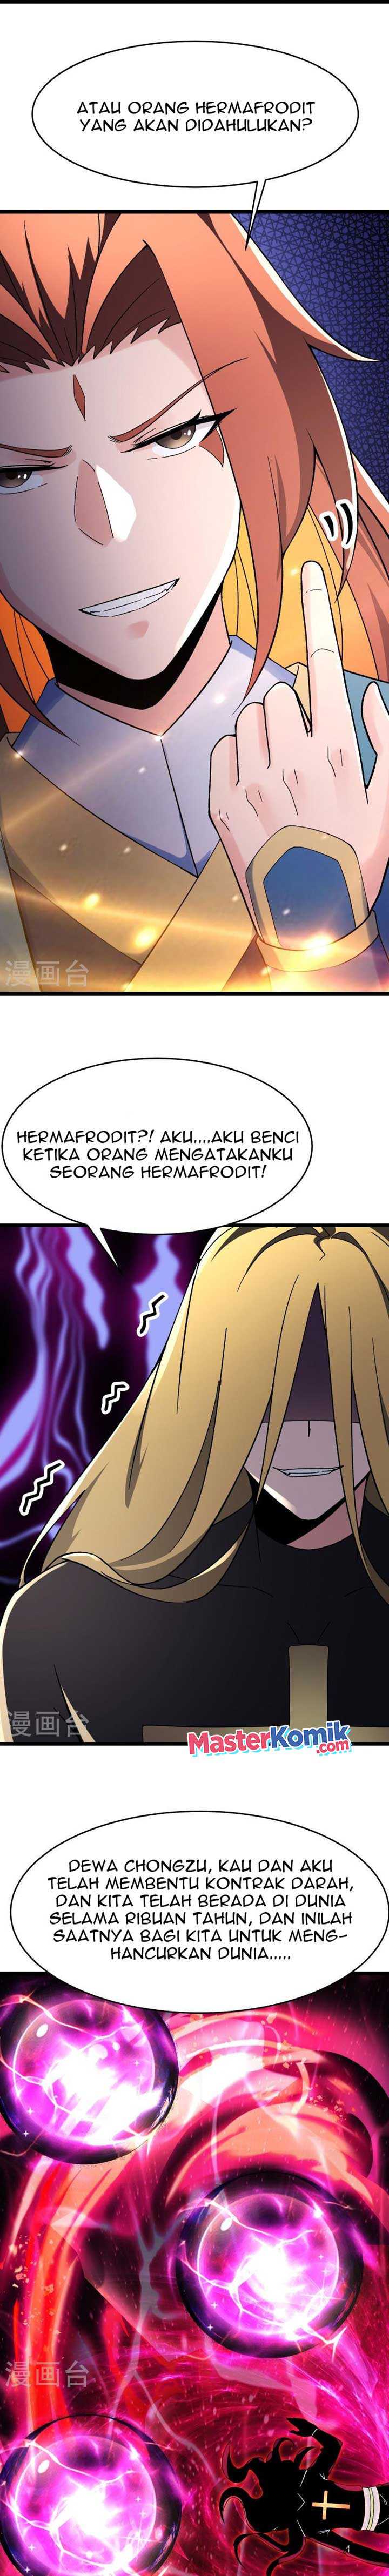 Apprentices Are All Female Devil Chapter 111